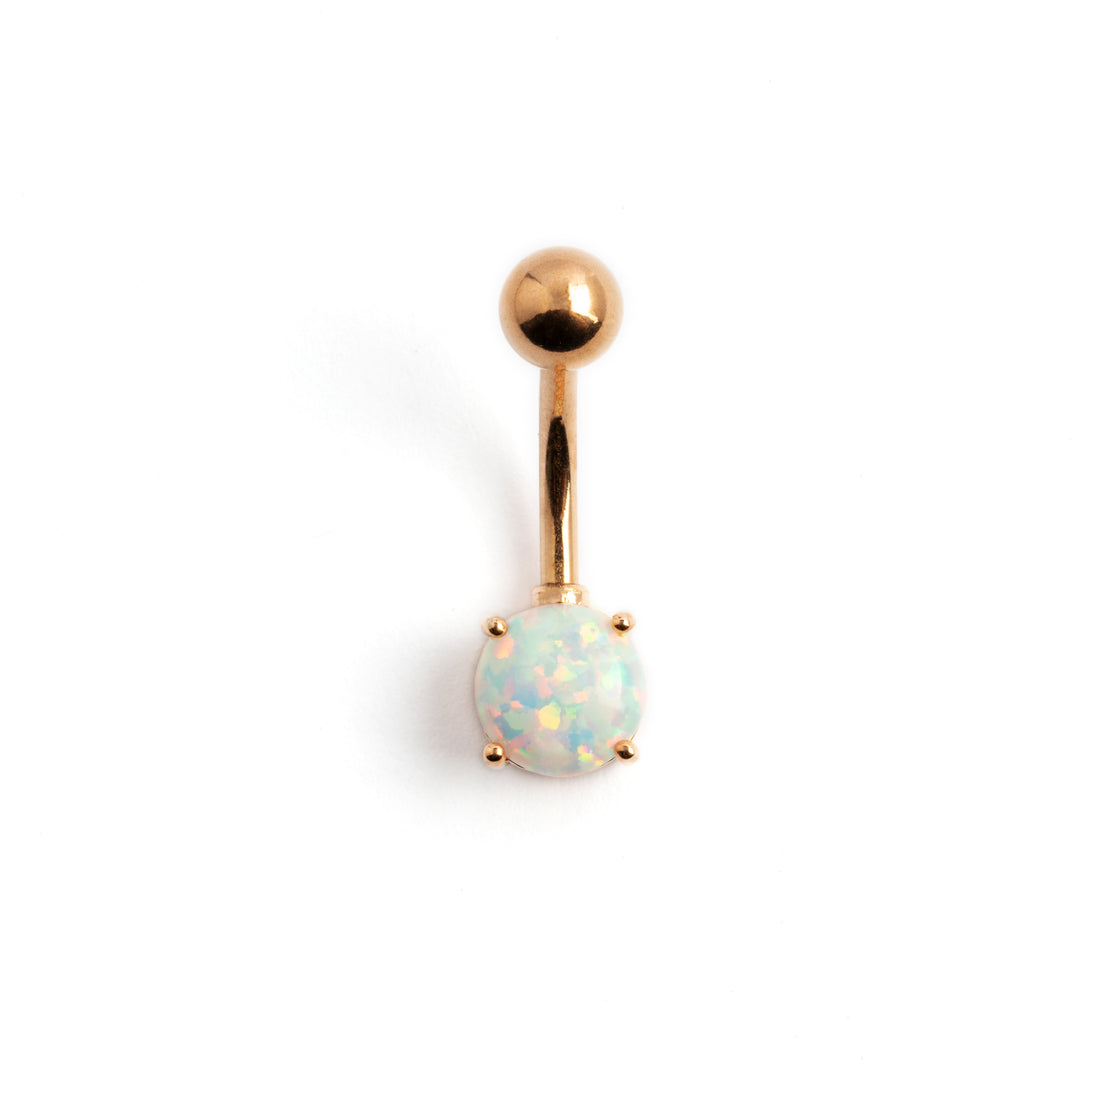 1.6mm/14g Rose Gold plated surgical steel belly button ring with set Opal frontal view